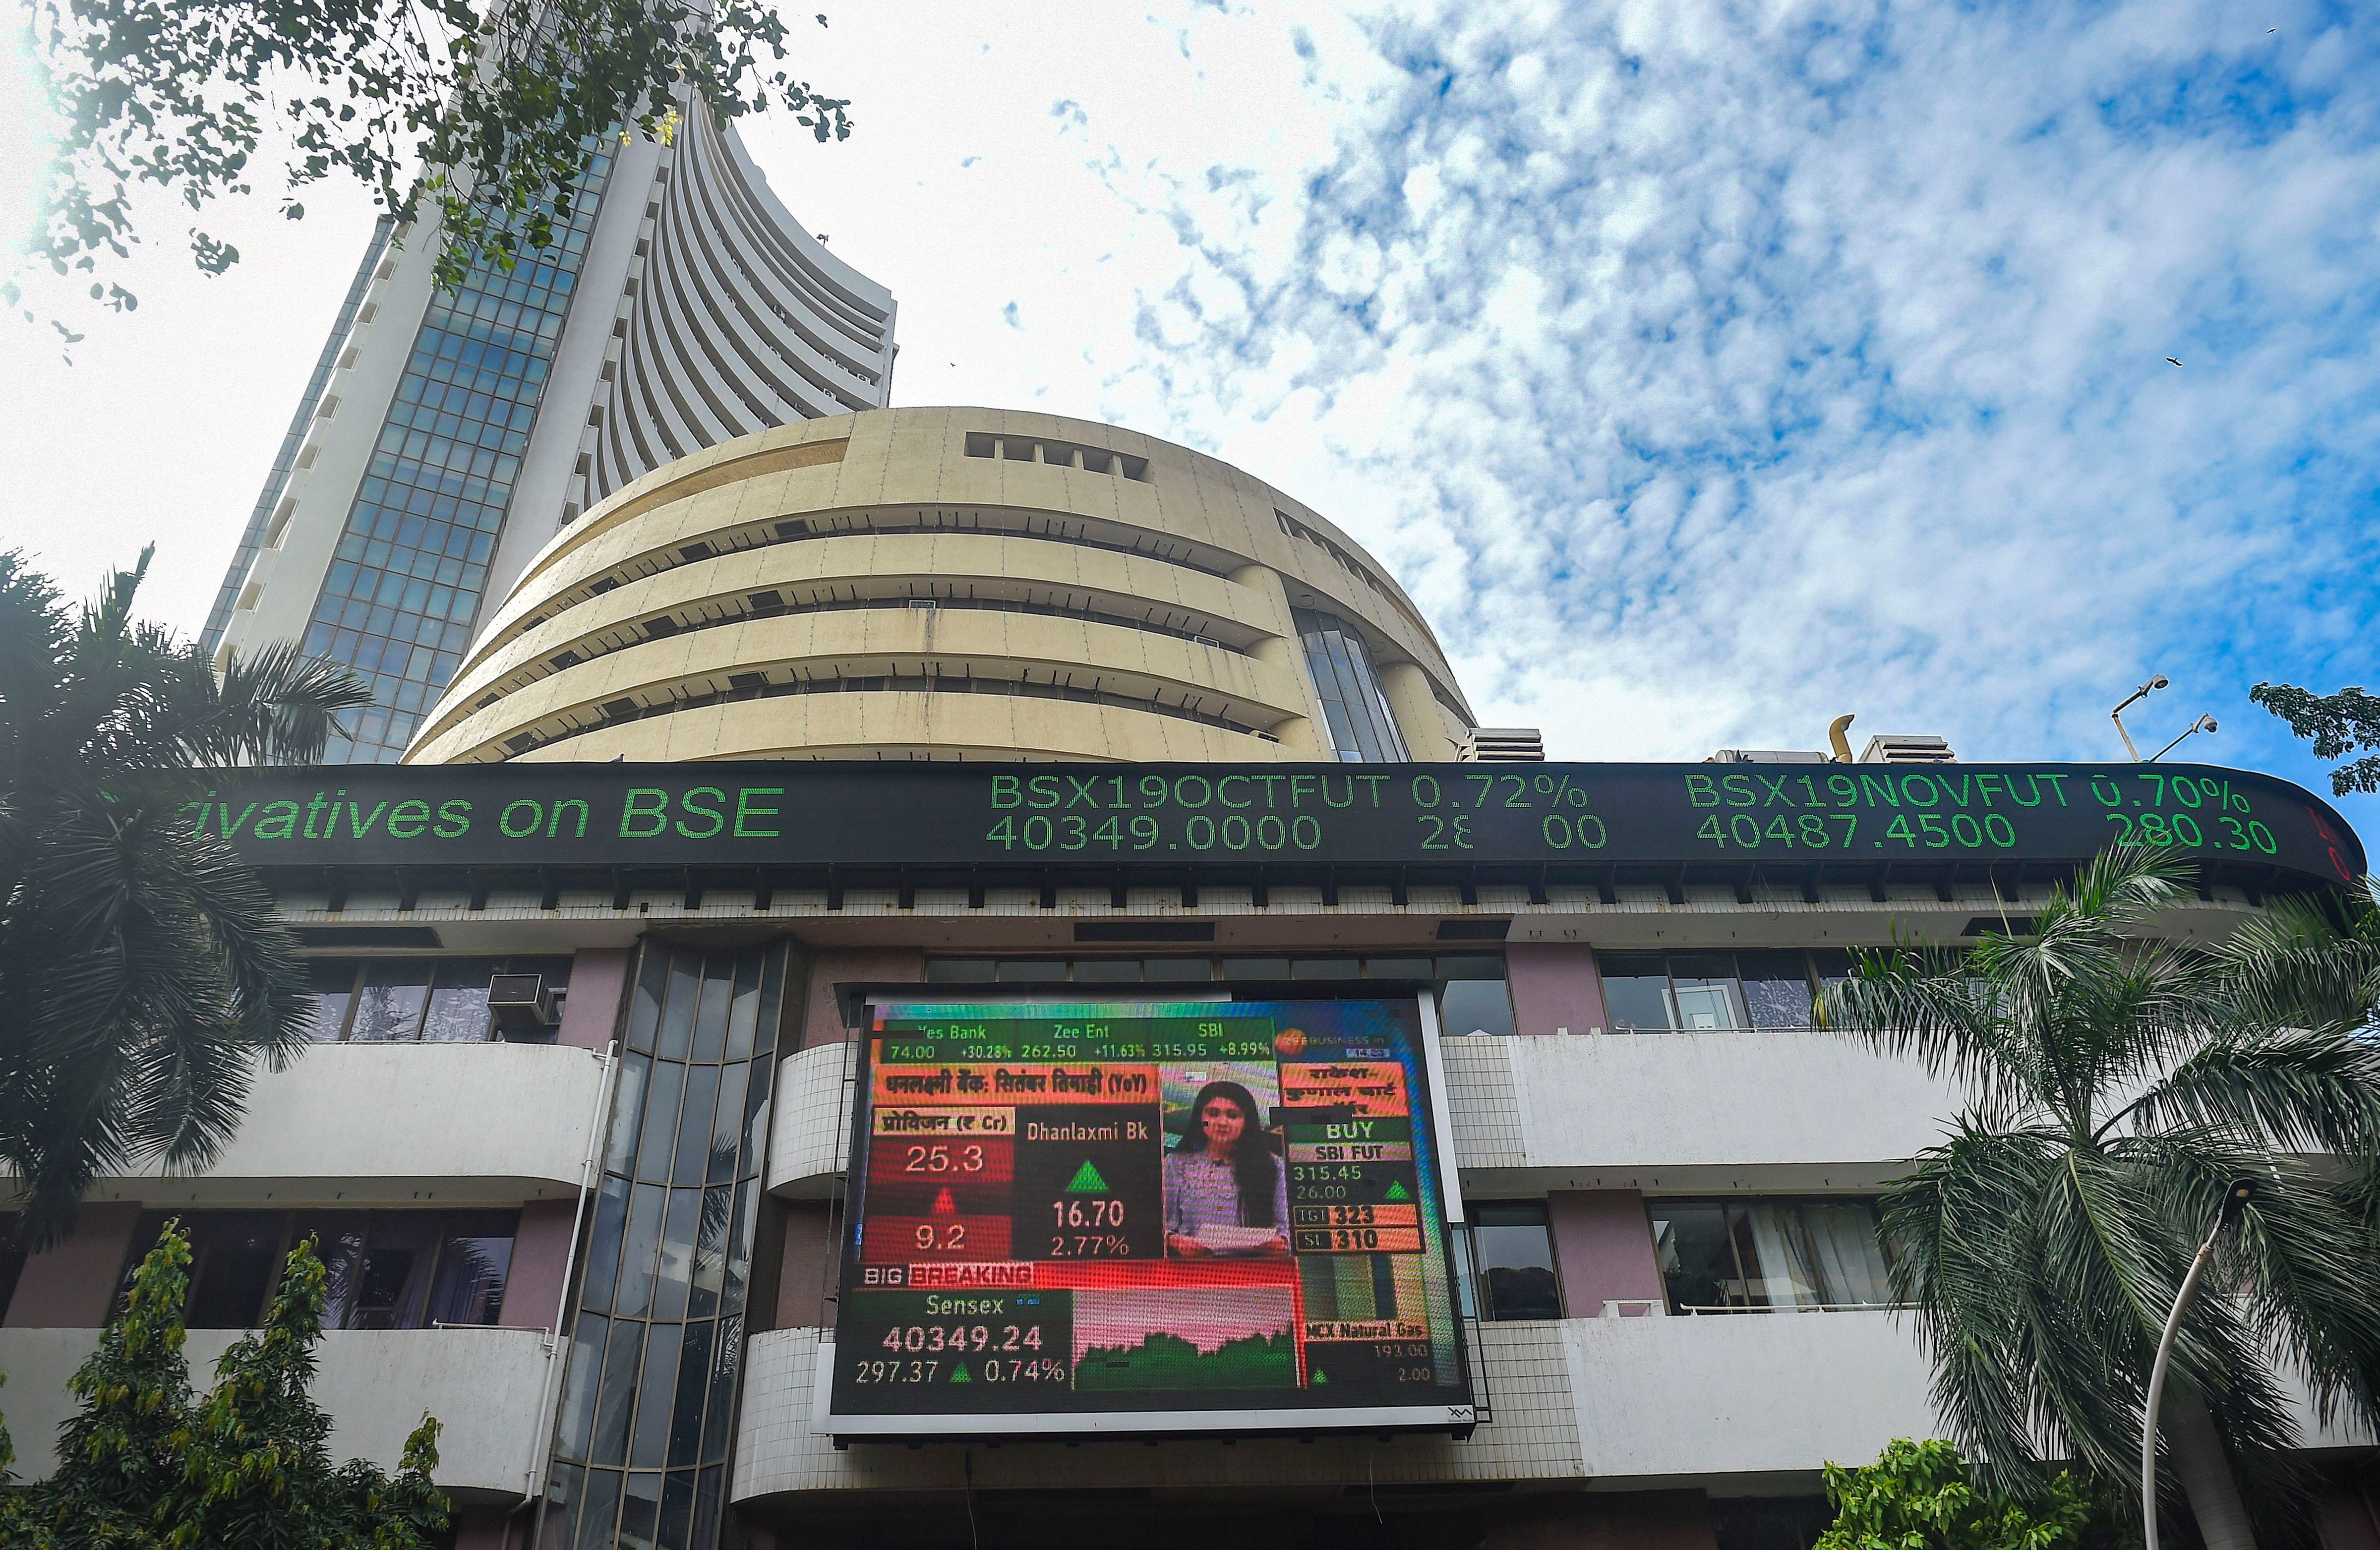 The BSE Sensex resumed its record-setting run Wednesday, Nov. 4, 2019, rallying 222 points to its new lifetime high of 40,469.78, as investors accumulated banking and financial stocks amid hopes of more reform measures to boost growth. (PTI Photo)